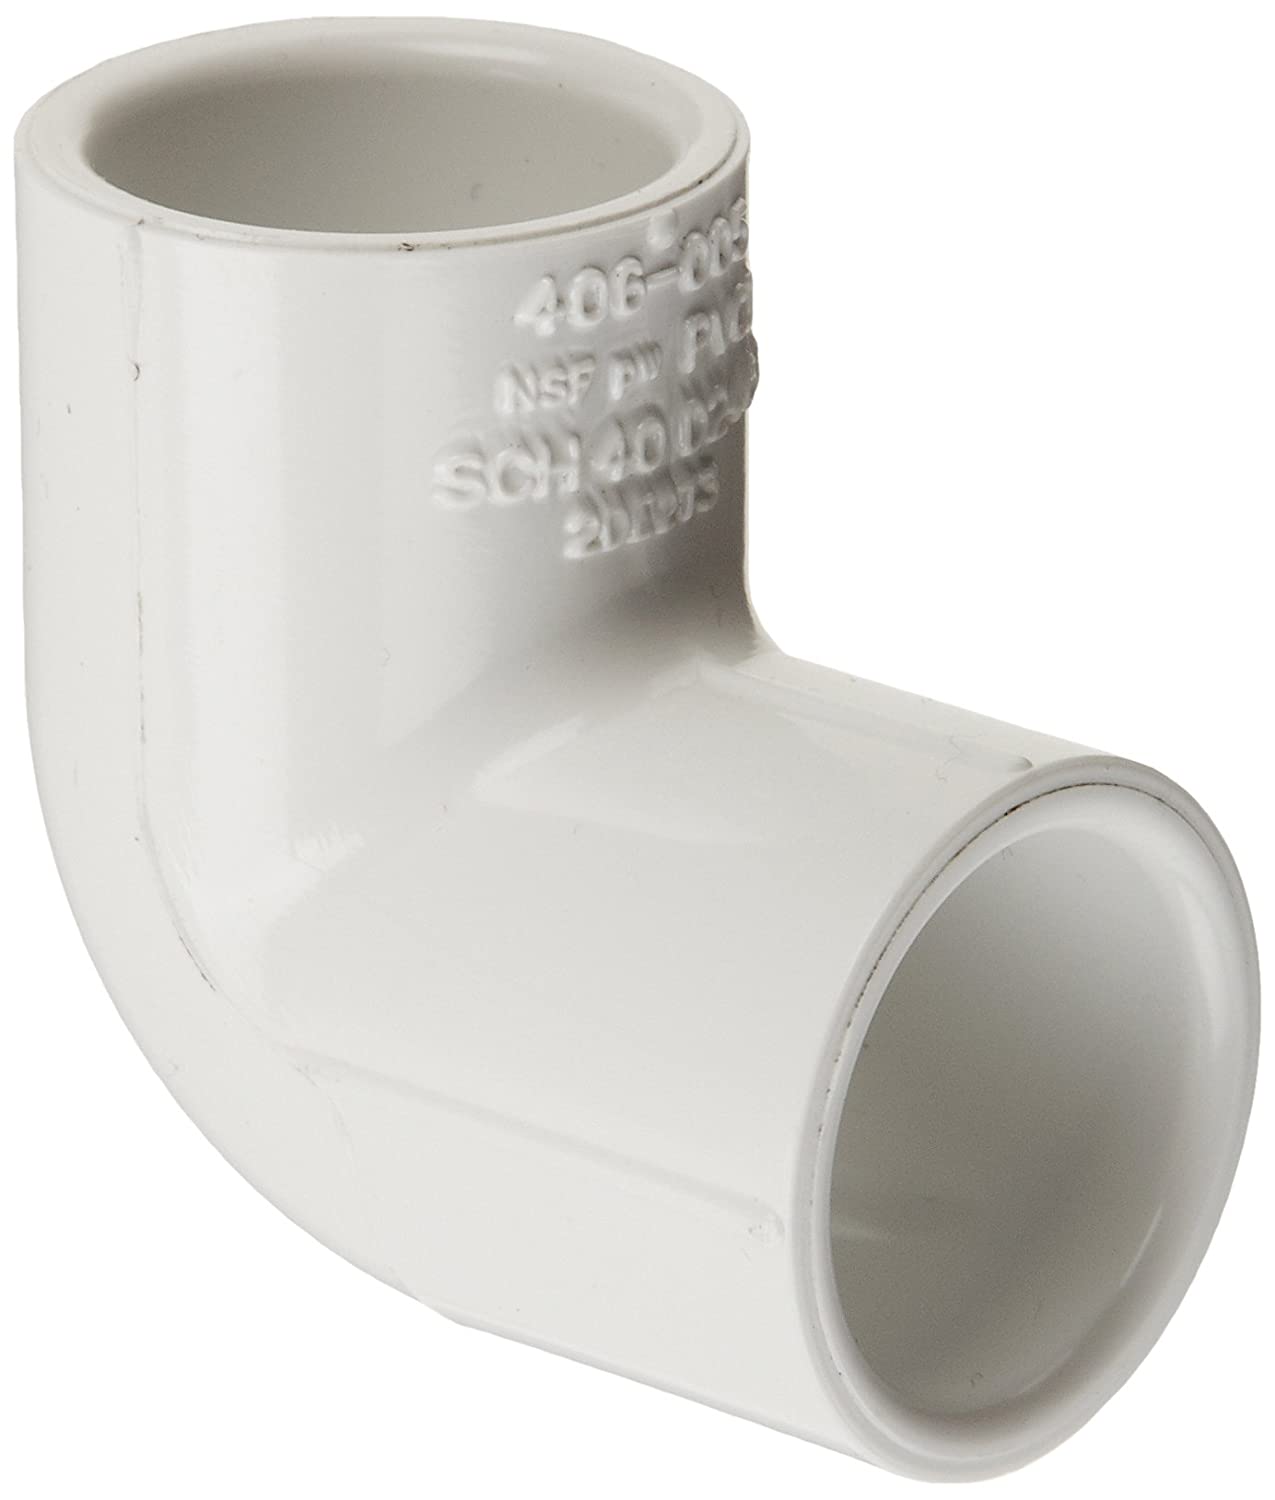 406-005 - PVC Pipe Fitting, 90 Degree Elbow, Schedule 40, White, 1/2" Socket